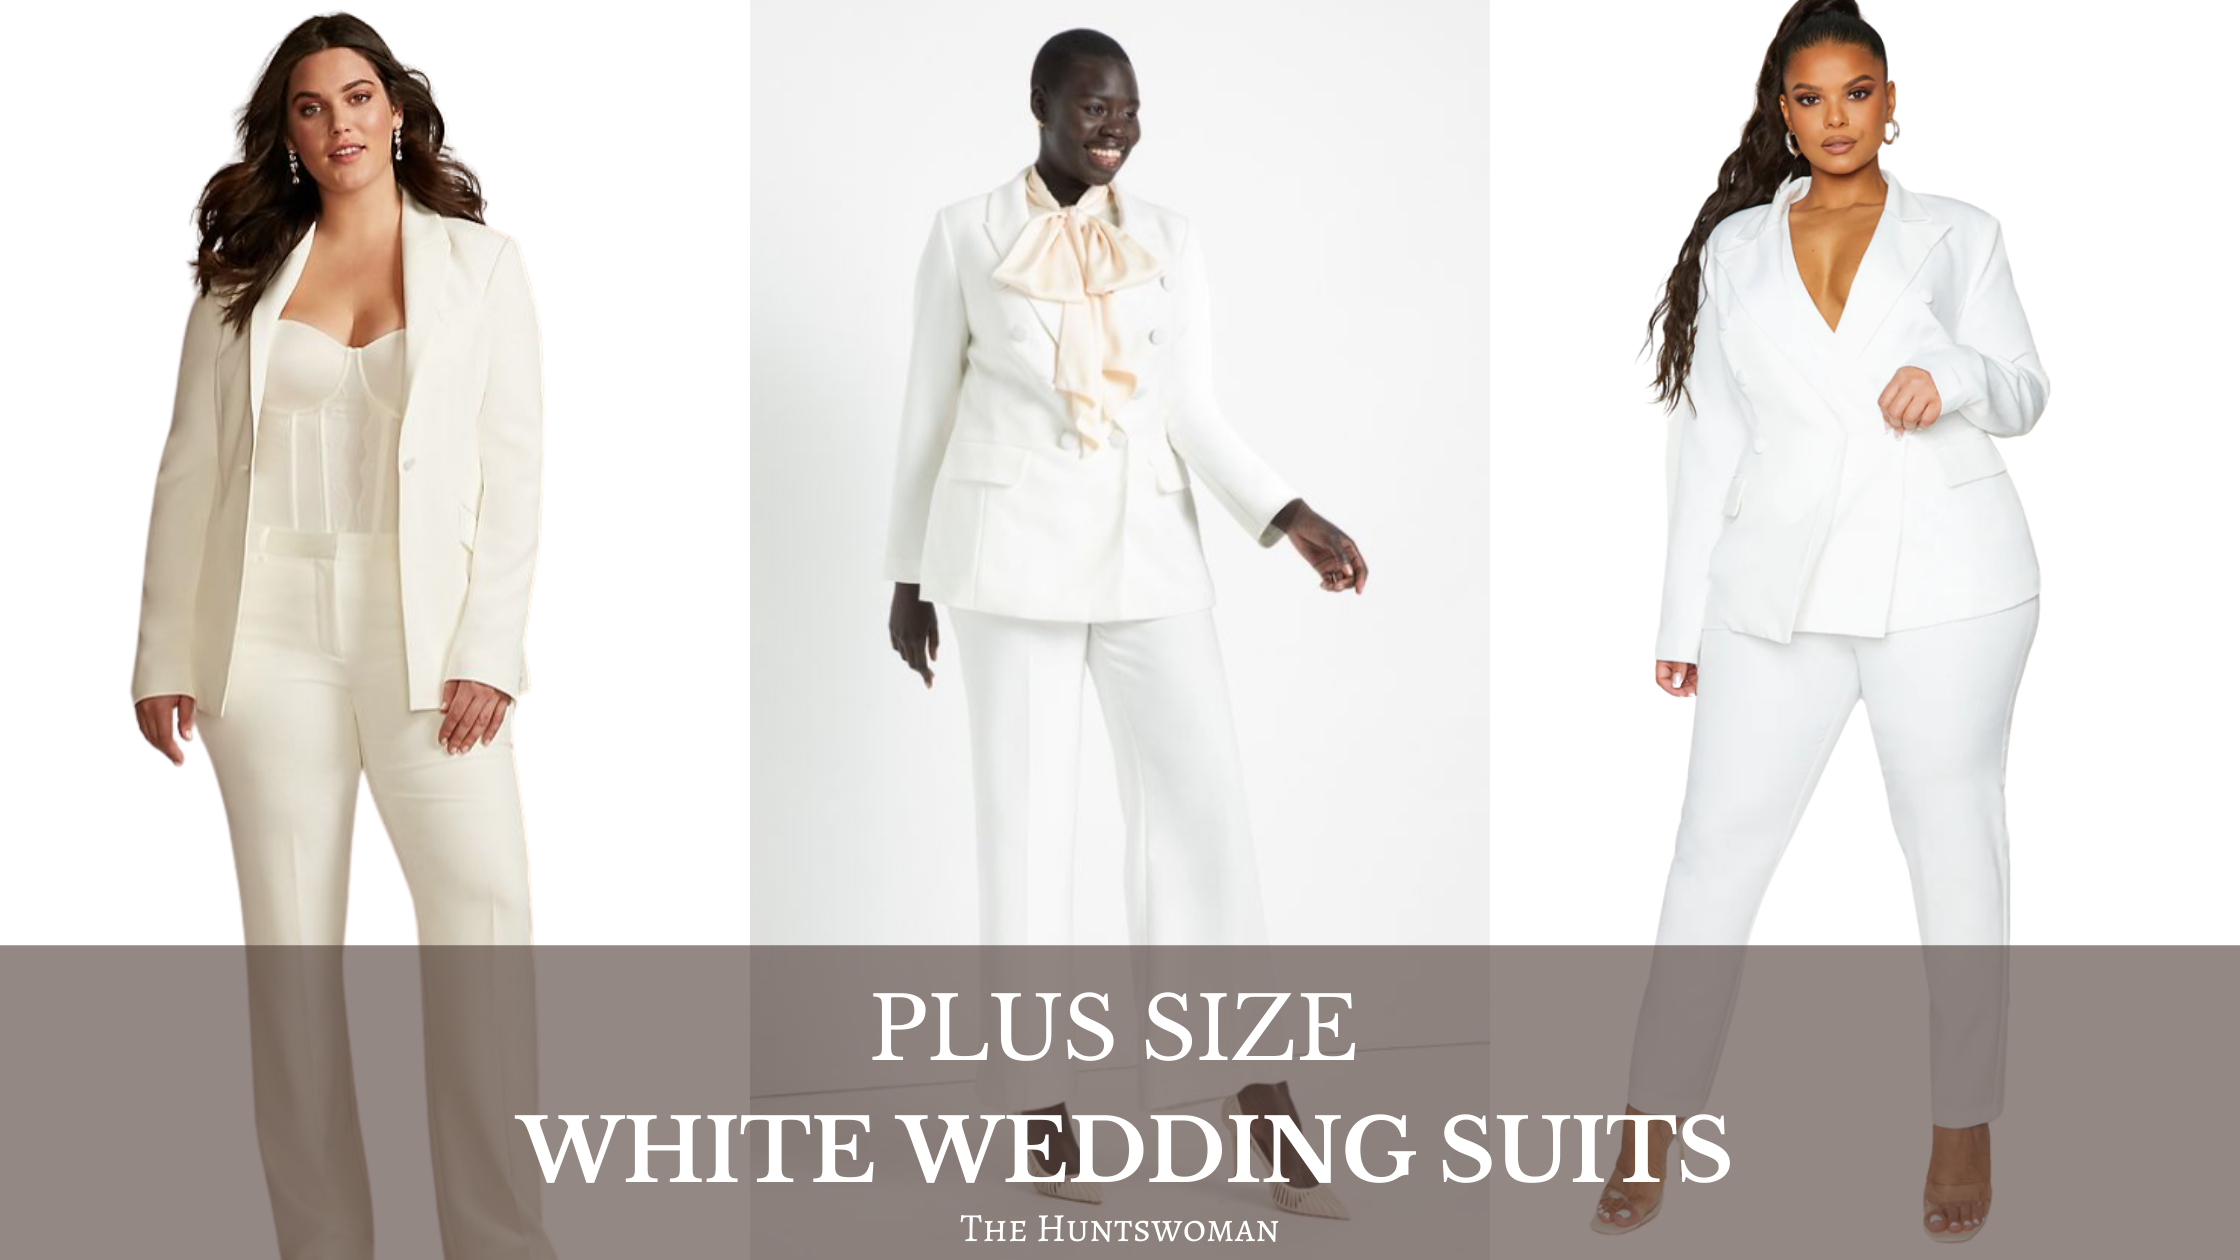 Wedding Suit for Women | Bridal Suits Online - Sumissura